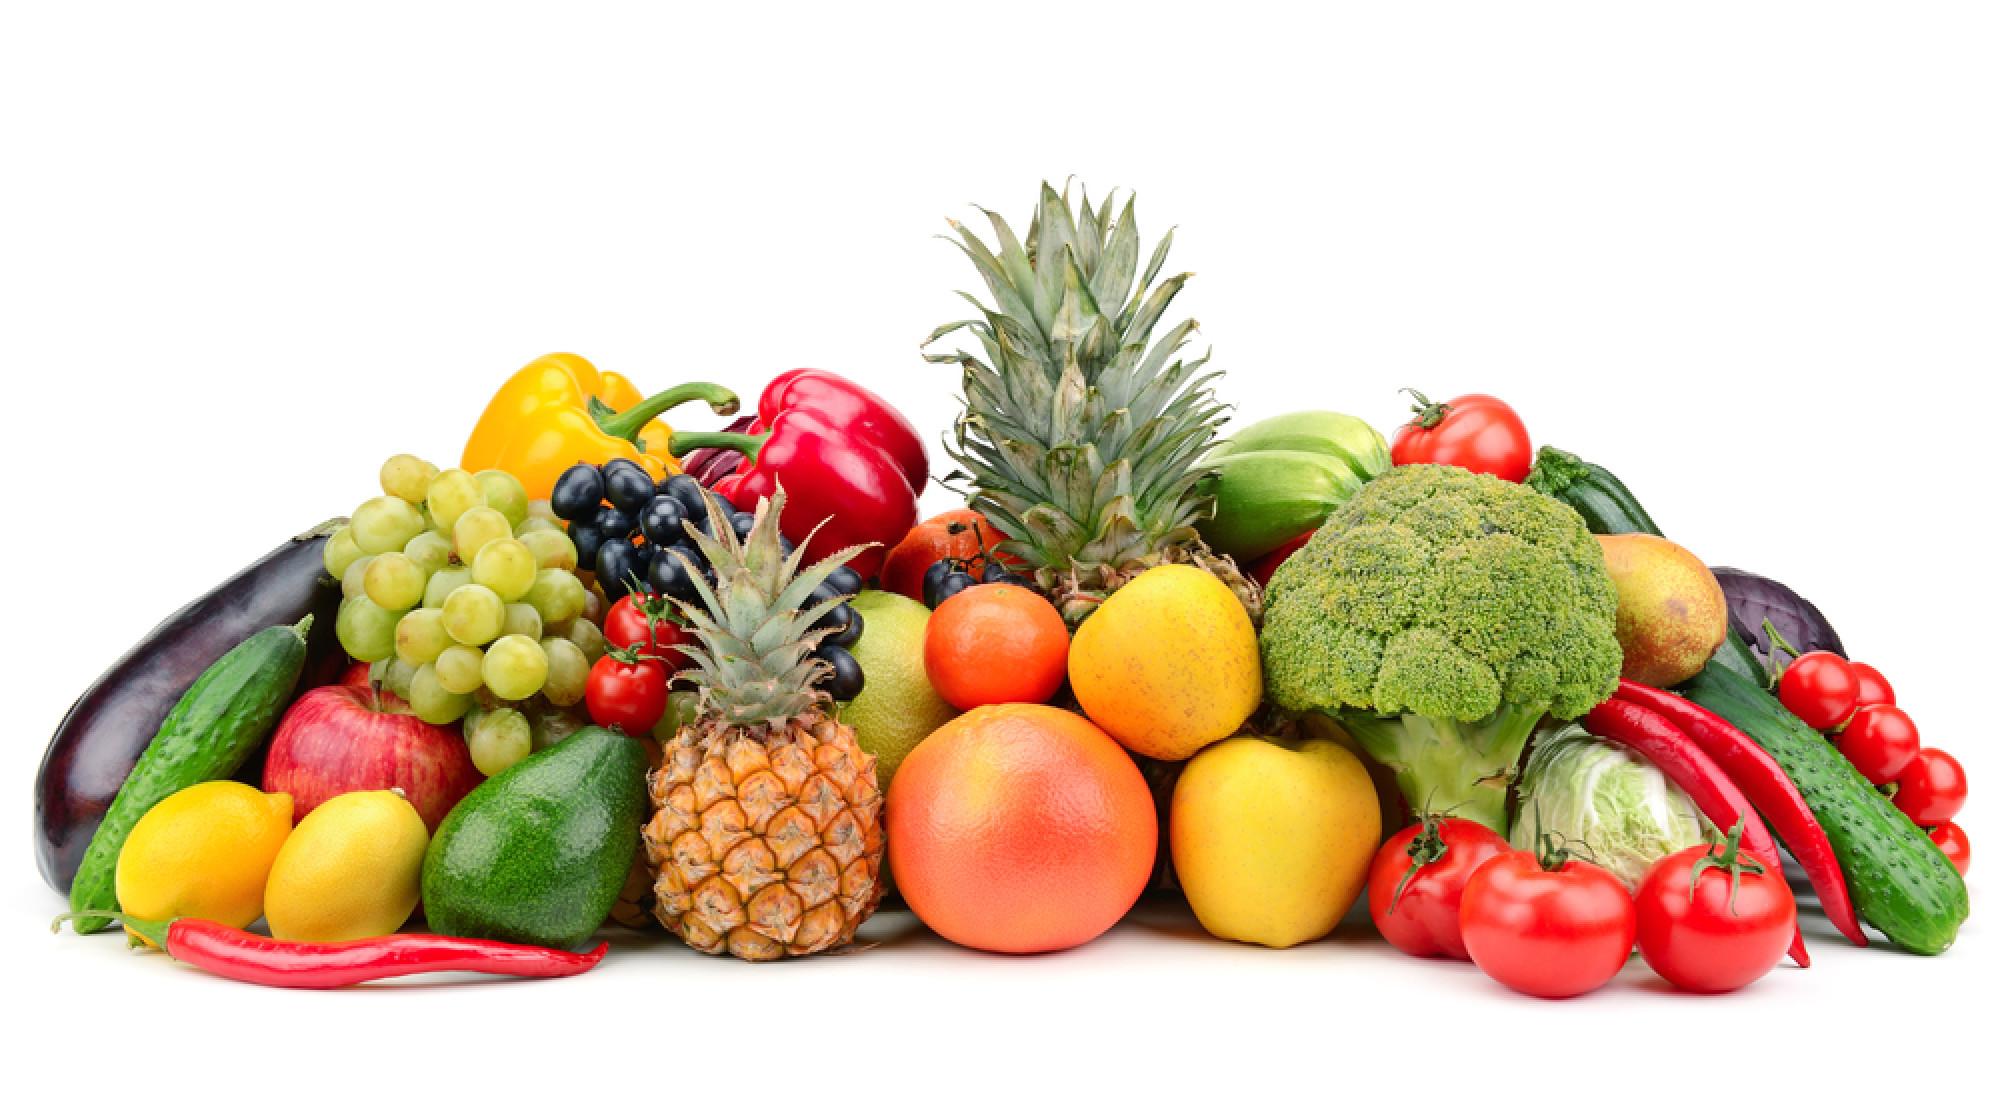 Fruits and vegetables Wallpaper